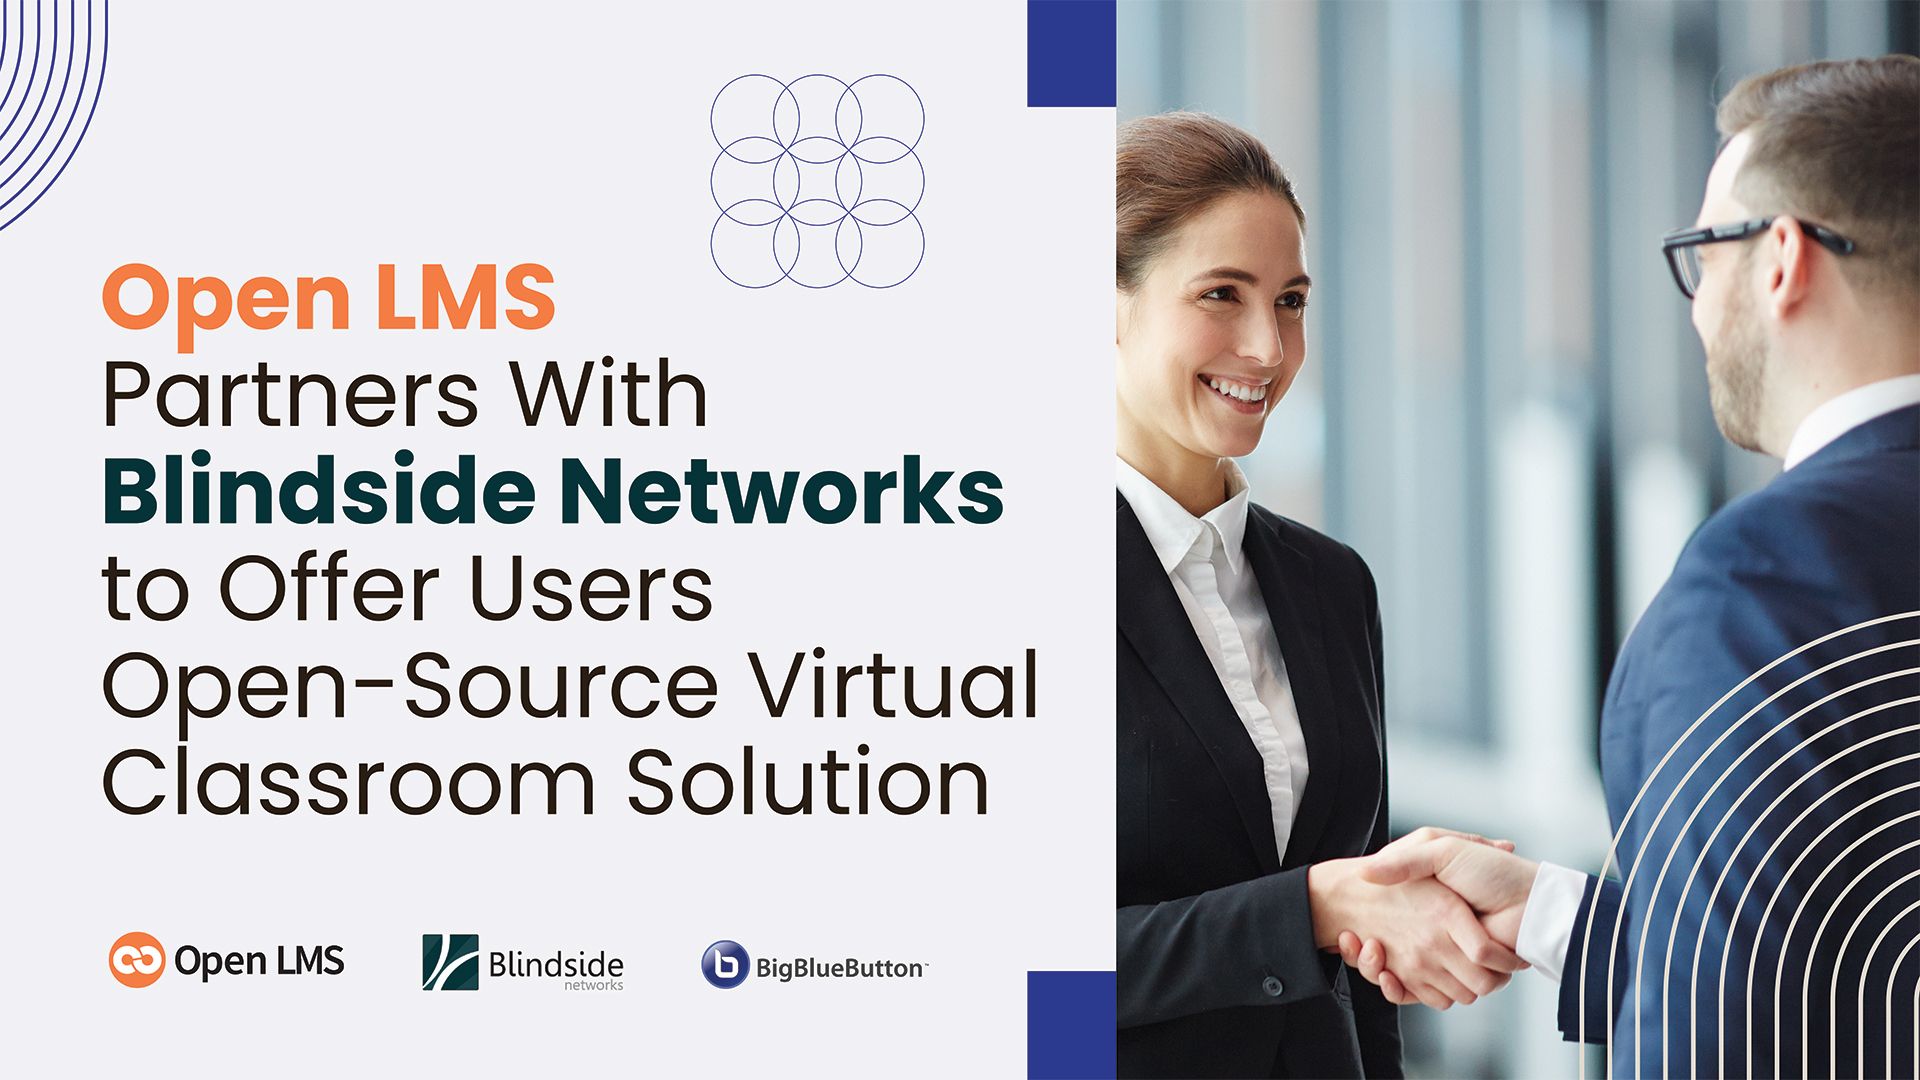 Open LMS Partners With Blindside Networks to Offer Users Open-Source Virtual Classroom Solution